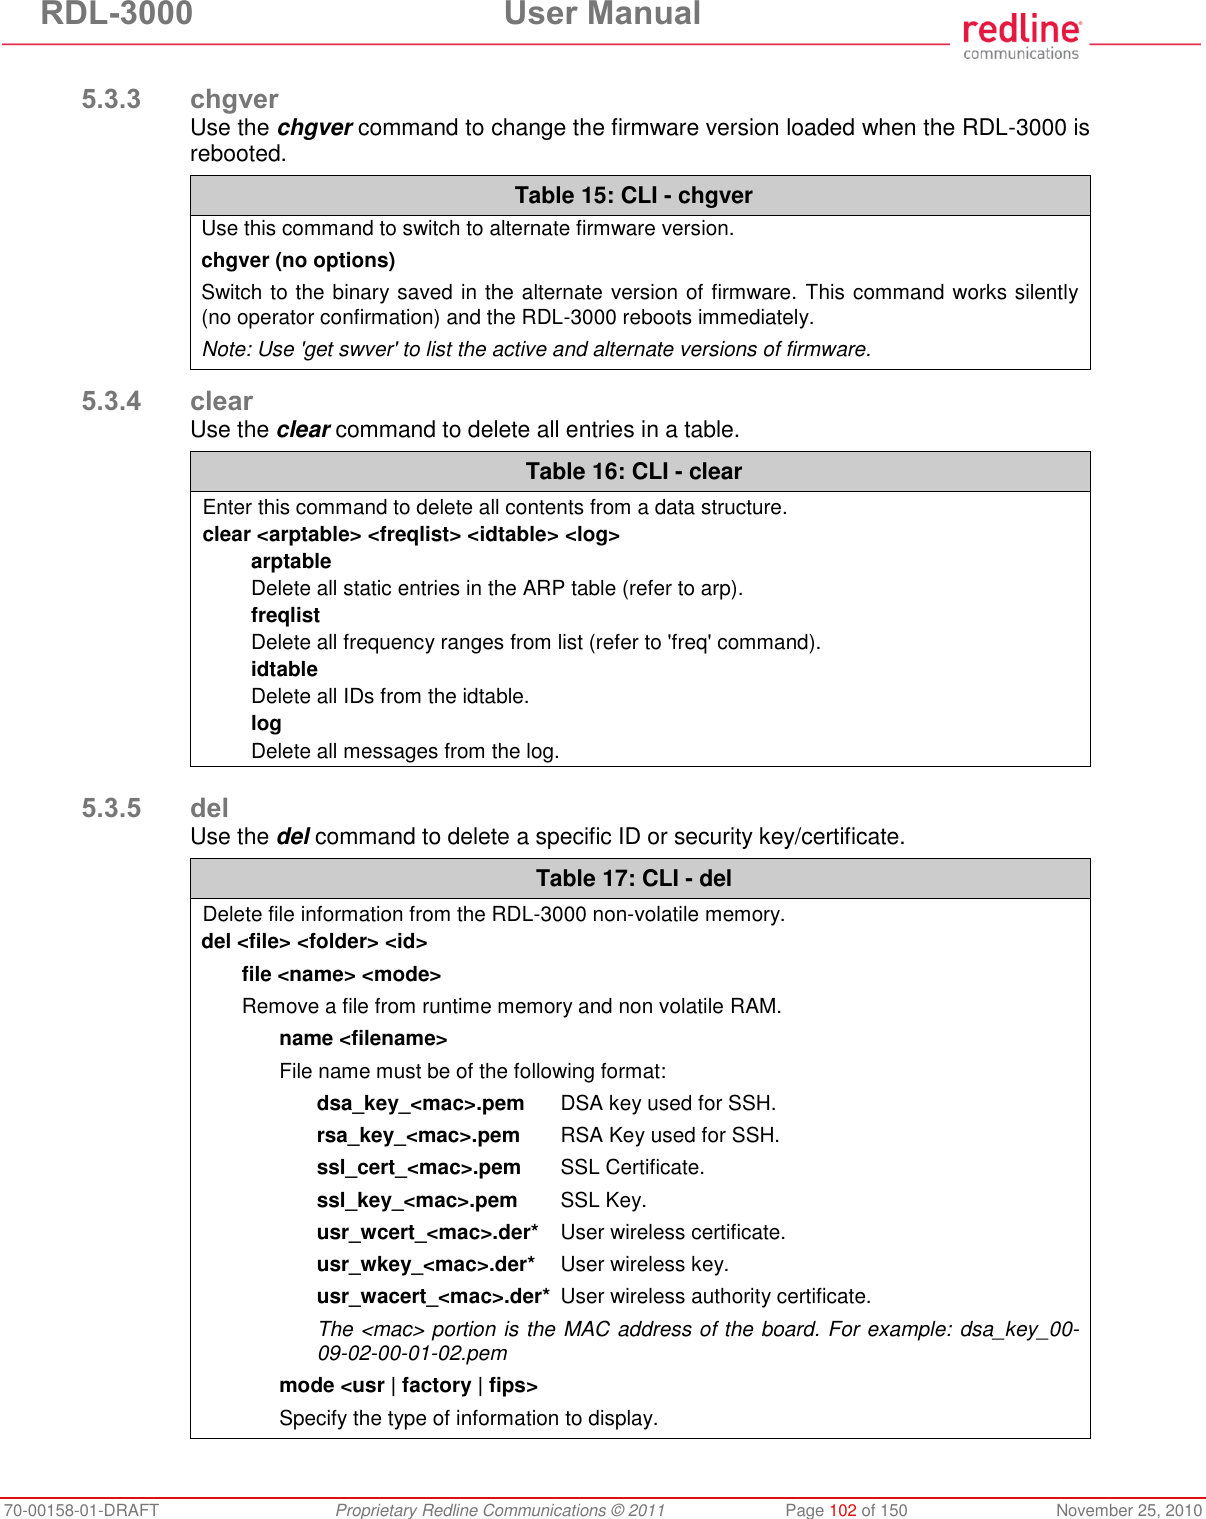 RDL-3000  User Manual 70-00158-01-DRAFT  Proprietary Redline Communications © 2011  Page 102 of 150  November 25, 2010  5.3.3 chgver Use the chgver command to change the firmware version loaded when the RDL-3000 is rebooted. Table 15: CLI - chgver Use this command to switch to alternate firmware version.  chgver (no options) Switch to the binary saved in the alternate version of firmware. This command works silently (no operator confirmation) and the RDL-3000 reboots immediately. Note: Use &apos;get swver&apos; to list the active and alternate versions of firmware.  5.3.4 clear Use the clear command to delete all entries in a table. Table 16: CLI - clear Enter this command to delete all contents from a data structure. clear &lt;arptable&gt; &lt;freqlist&gt; &lt;idtable&gt; &lt;log&gt; arptable Delete all static entries in the ARP table (refer to arp). freqlist Delete all frequency ranges from list (refer to &apos;freq&apos; command). idtable Delete all IDs from the idtable. log Delete all messages from the log.   5.3.5 del Use the del command to delete a specific ID or security key/certificate. Table 17: CLI - del Delete file information from the RDL-3000 non-volatile memory. del &lt;file&gt; &lt;folder&gt; &lt;id&gt; file &lt;name&gt; &lt;mode&gt; Remove a file from runtime memory and non volatile RAM.   name &lt;filename&gt;   File name must be of the following format:  dsa_key_&lt;mac&gt;.pem  DSA key used for SSH.  rsa_key_&lt;mac&gt;.pem  RSA Key used for SSH.  ssl_cert_&lt;mac&gt;.pem  SSL Certificate.  ssl_key_&lt;mac&gt;.pem  SSL Key.  usr_wcert_&lt;mac&gt;.der*  User wireless certificate.  usr_wkey_&lt;mac&gt;.der*  User wireless key.  usr_wacert_&lt;mac&gt;.der*  User wireless authority certificate.  The &lt;mac&gt; portion is the MAC address of the board. For example: dsa_key_00-09-02-00-01-02.pem mode &lt;usr | factory | fips&gt; Specify the type of information to display. 